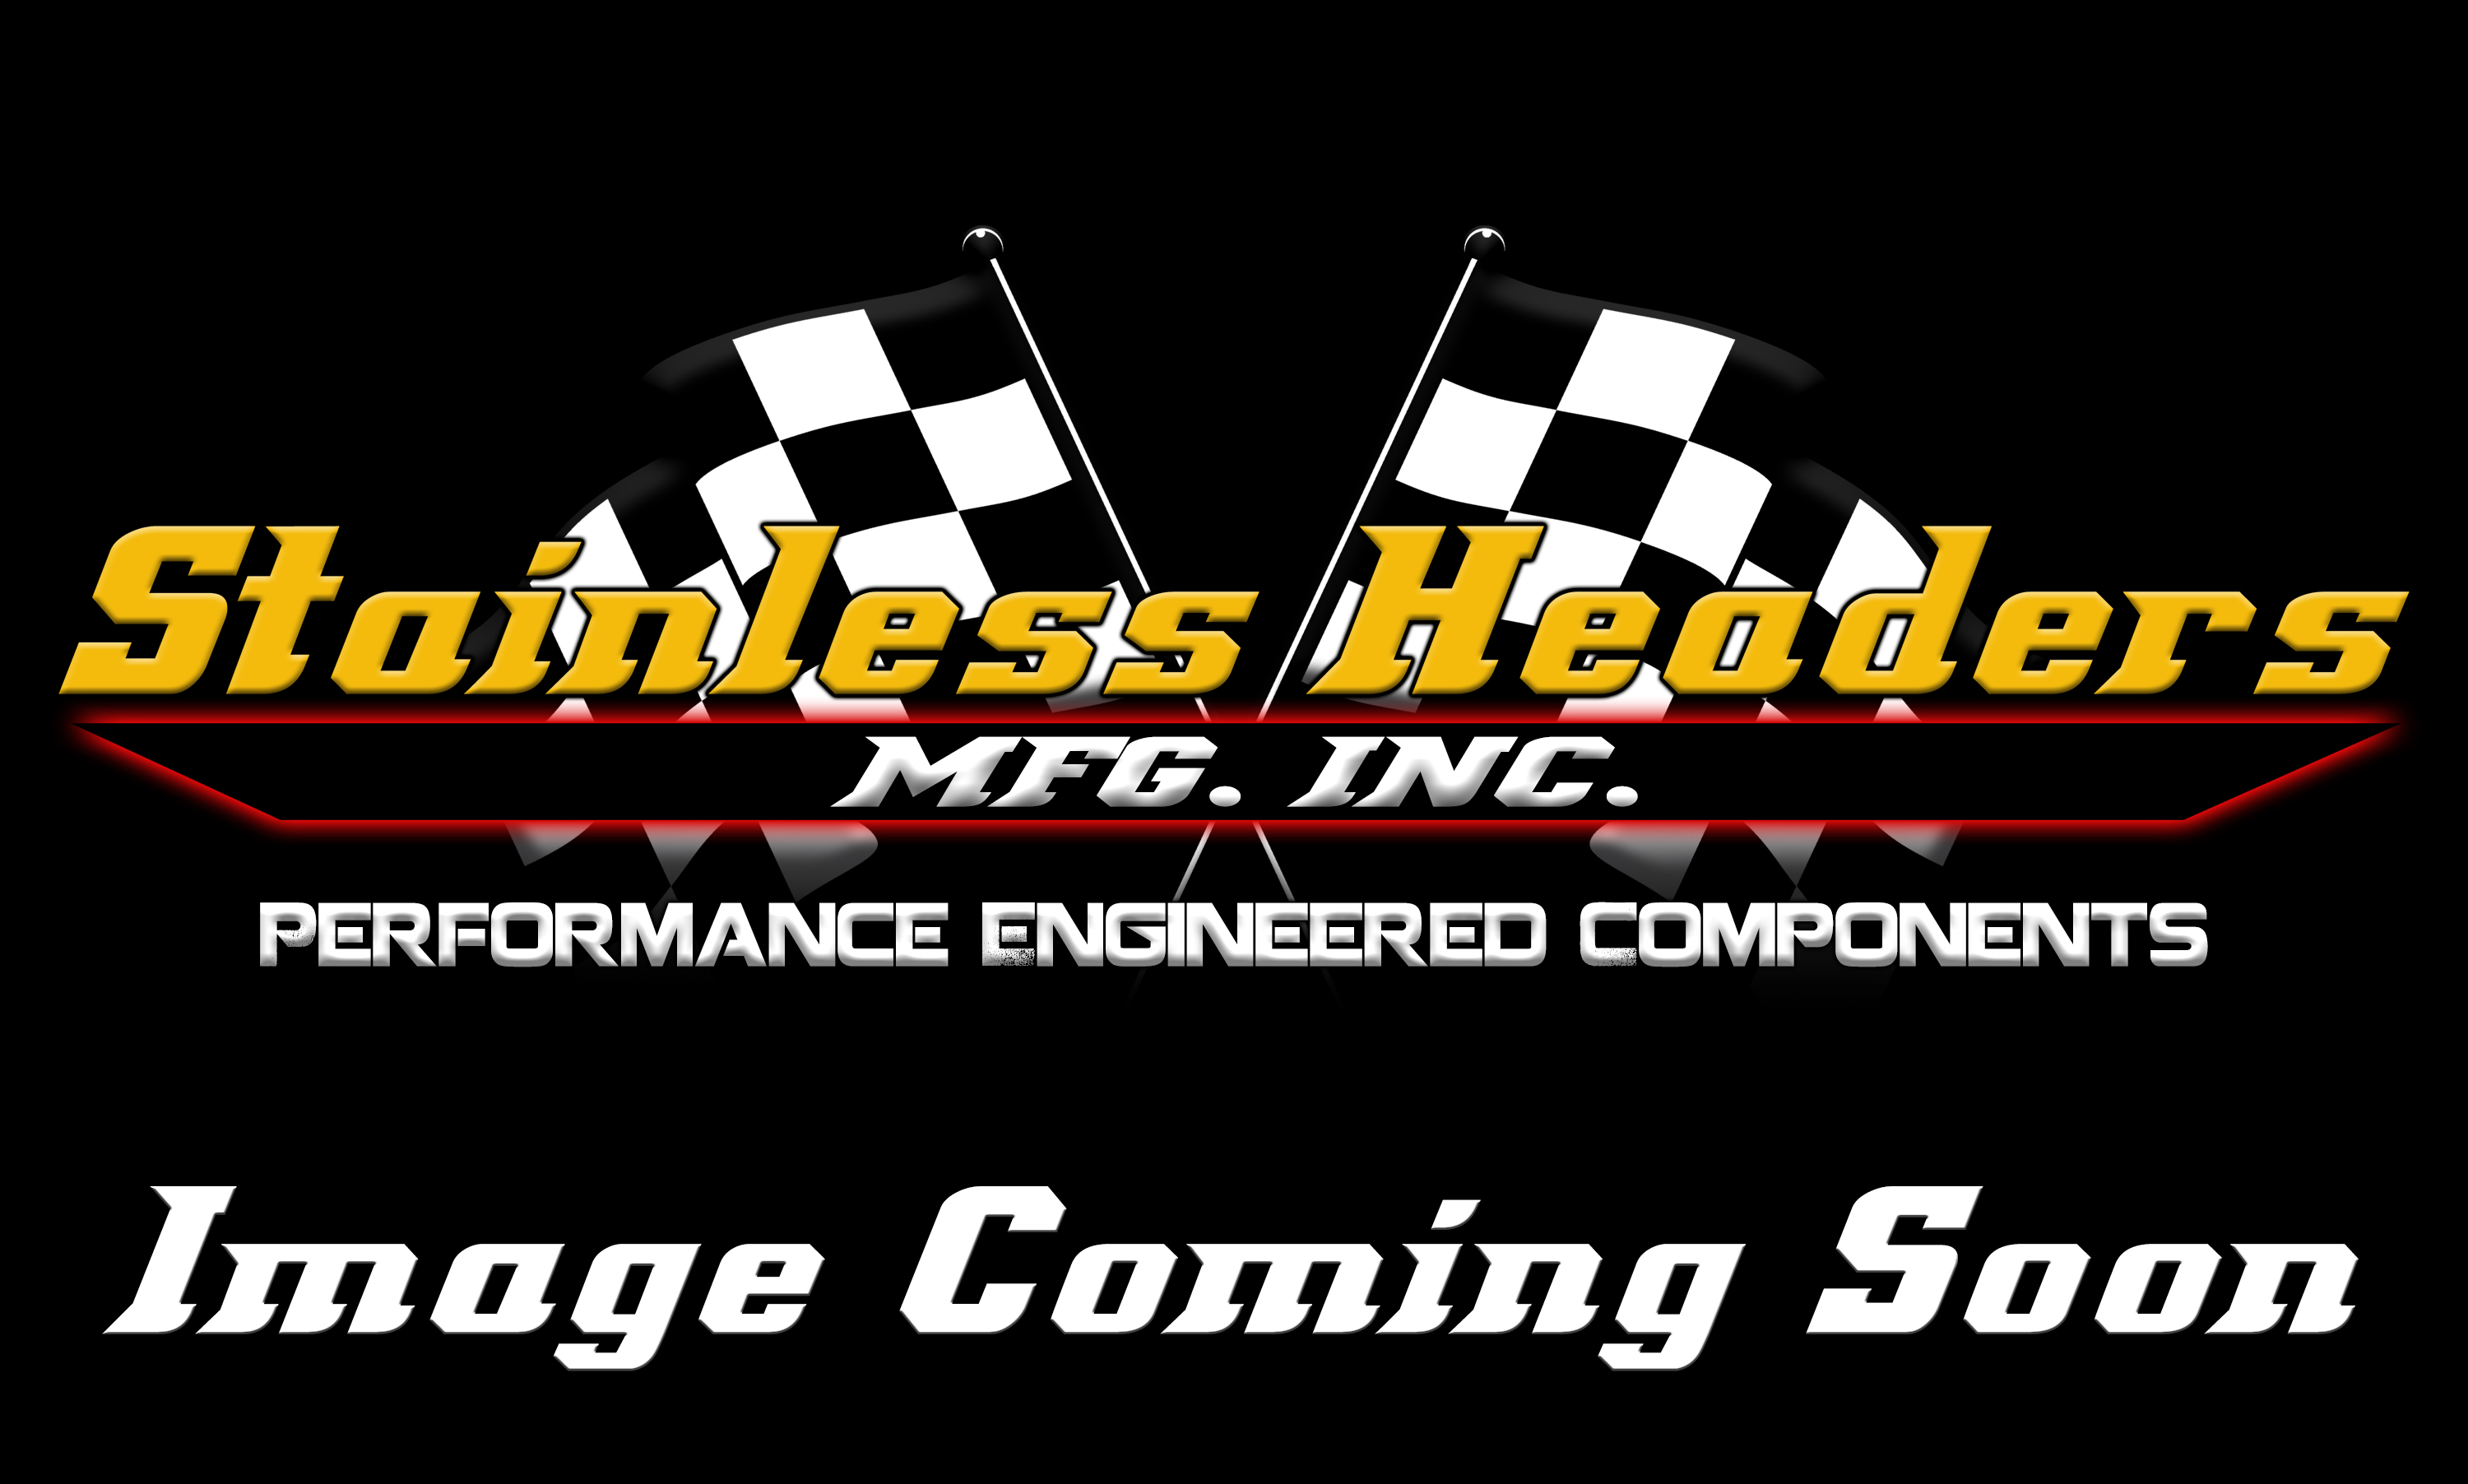 Merge Collectors - 321 Stainless Steel Merge Collectors - Stainless Headers - 1 7/8" Primary 5 into 1 Performance Merge Collector-16ga 321ss